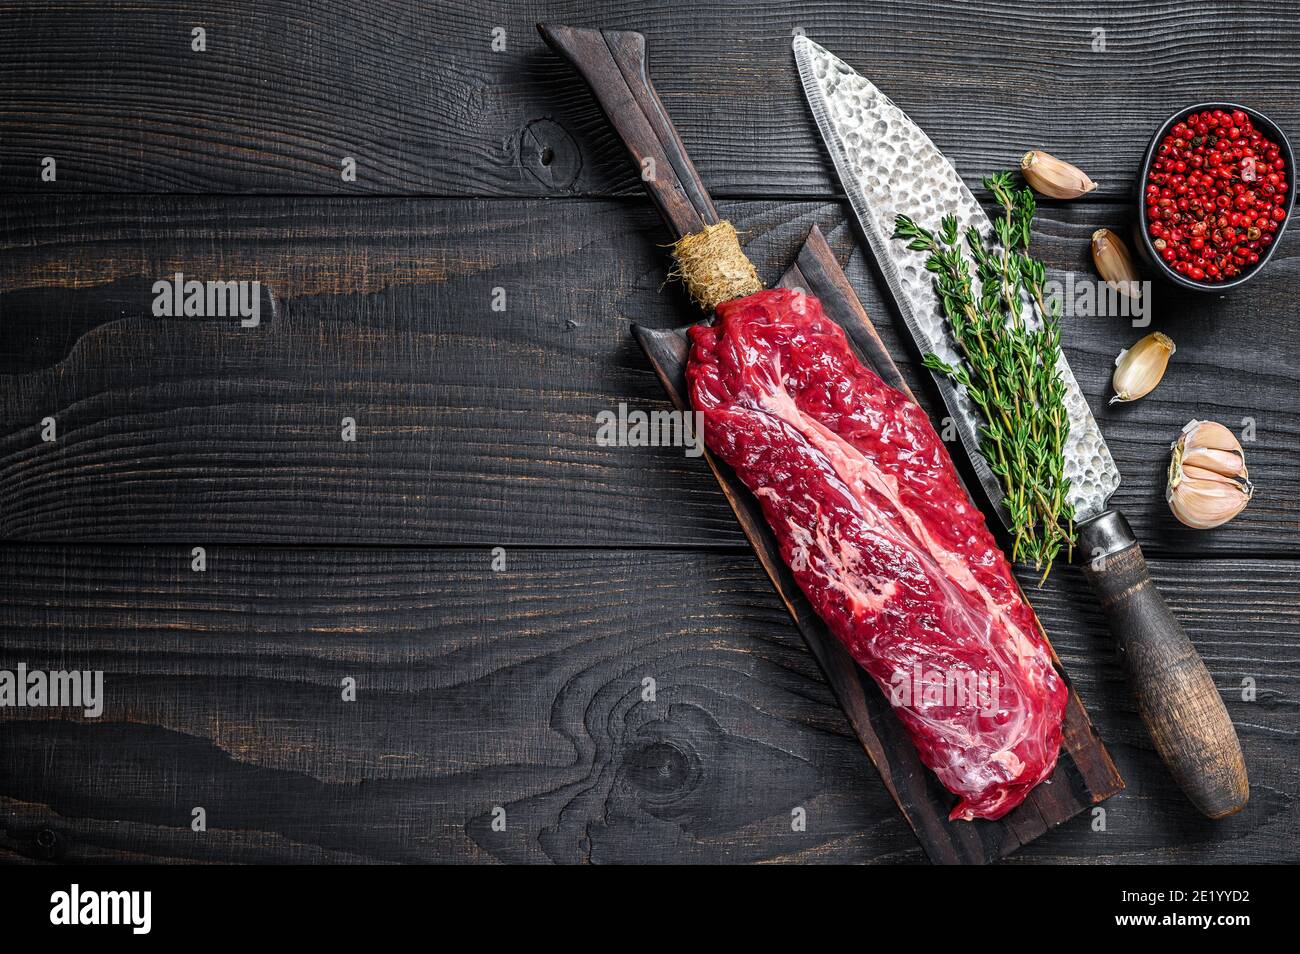 Raw Onglet Hanging Tender beef meat steak on a wooden cutting board. Black wooden background. Top view. Copy space Stock Photo